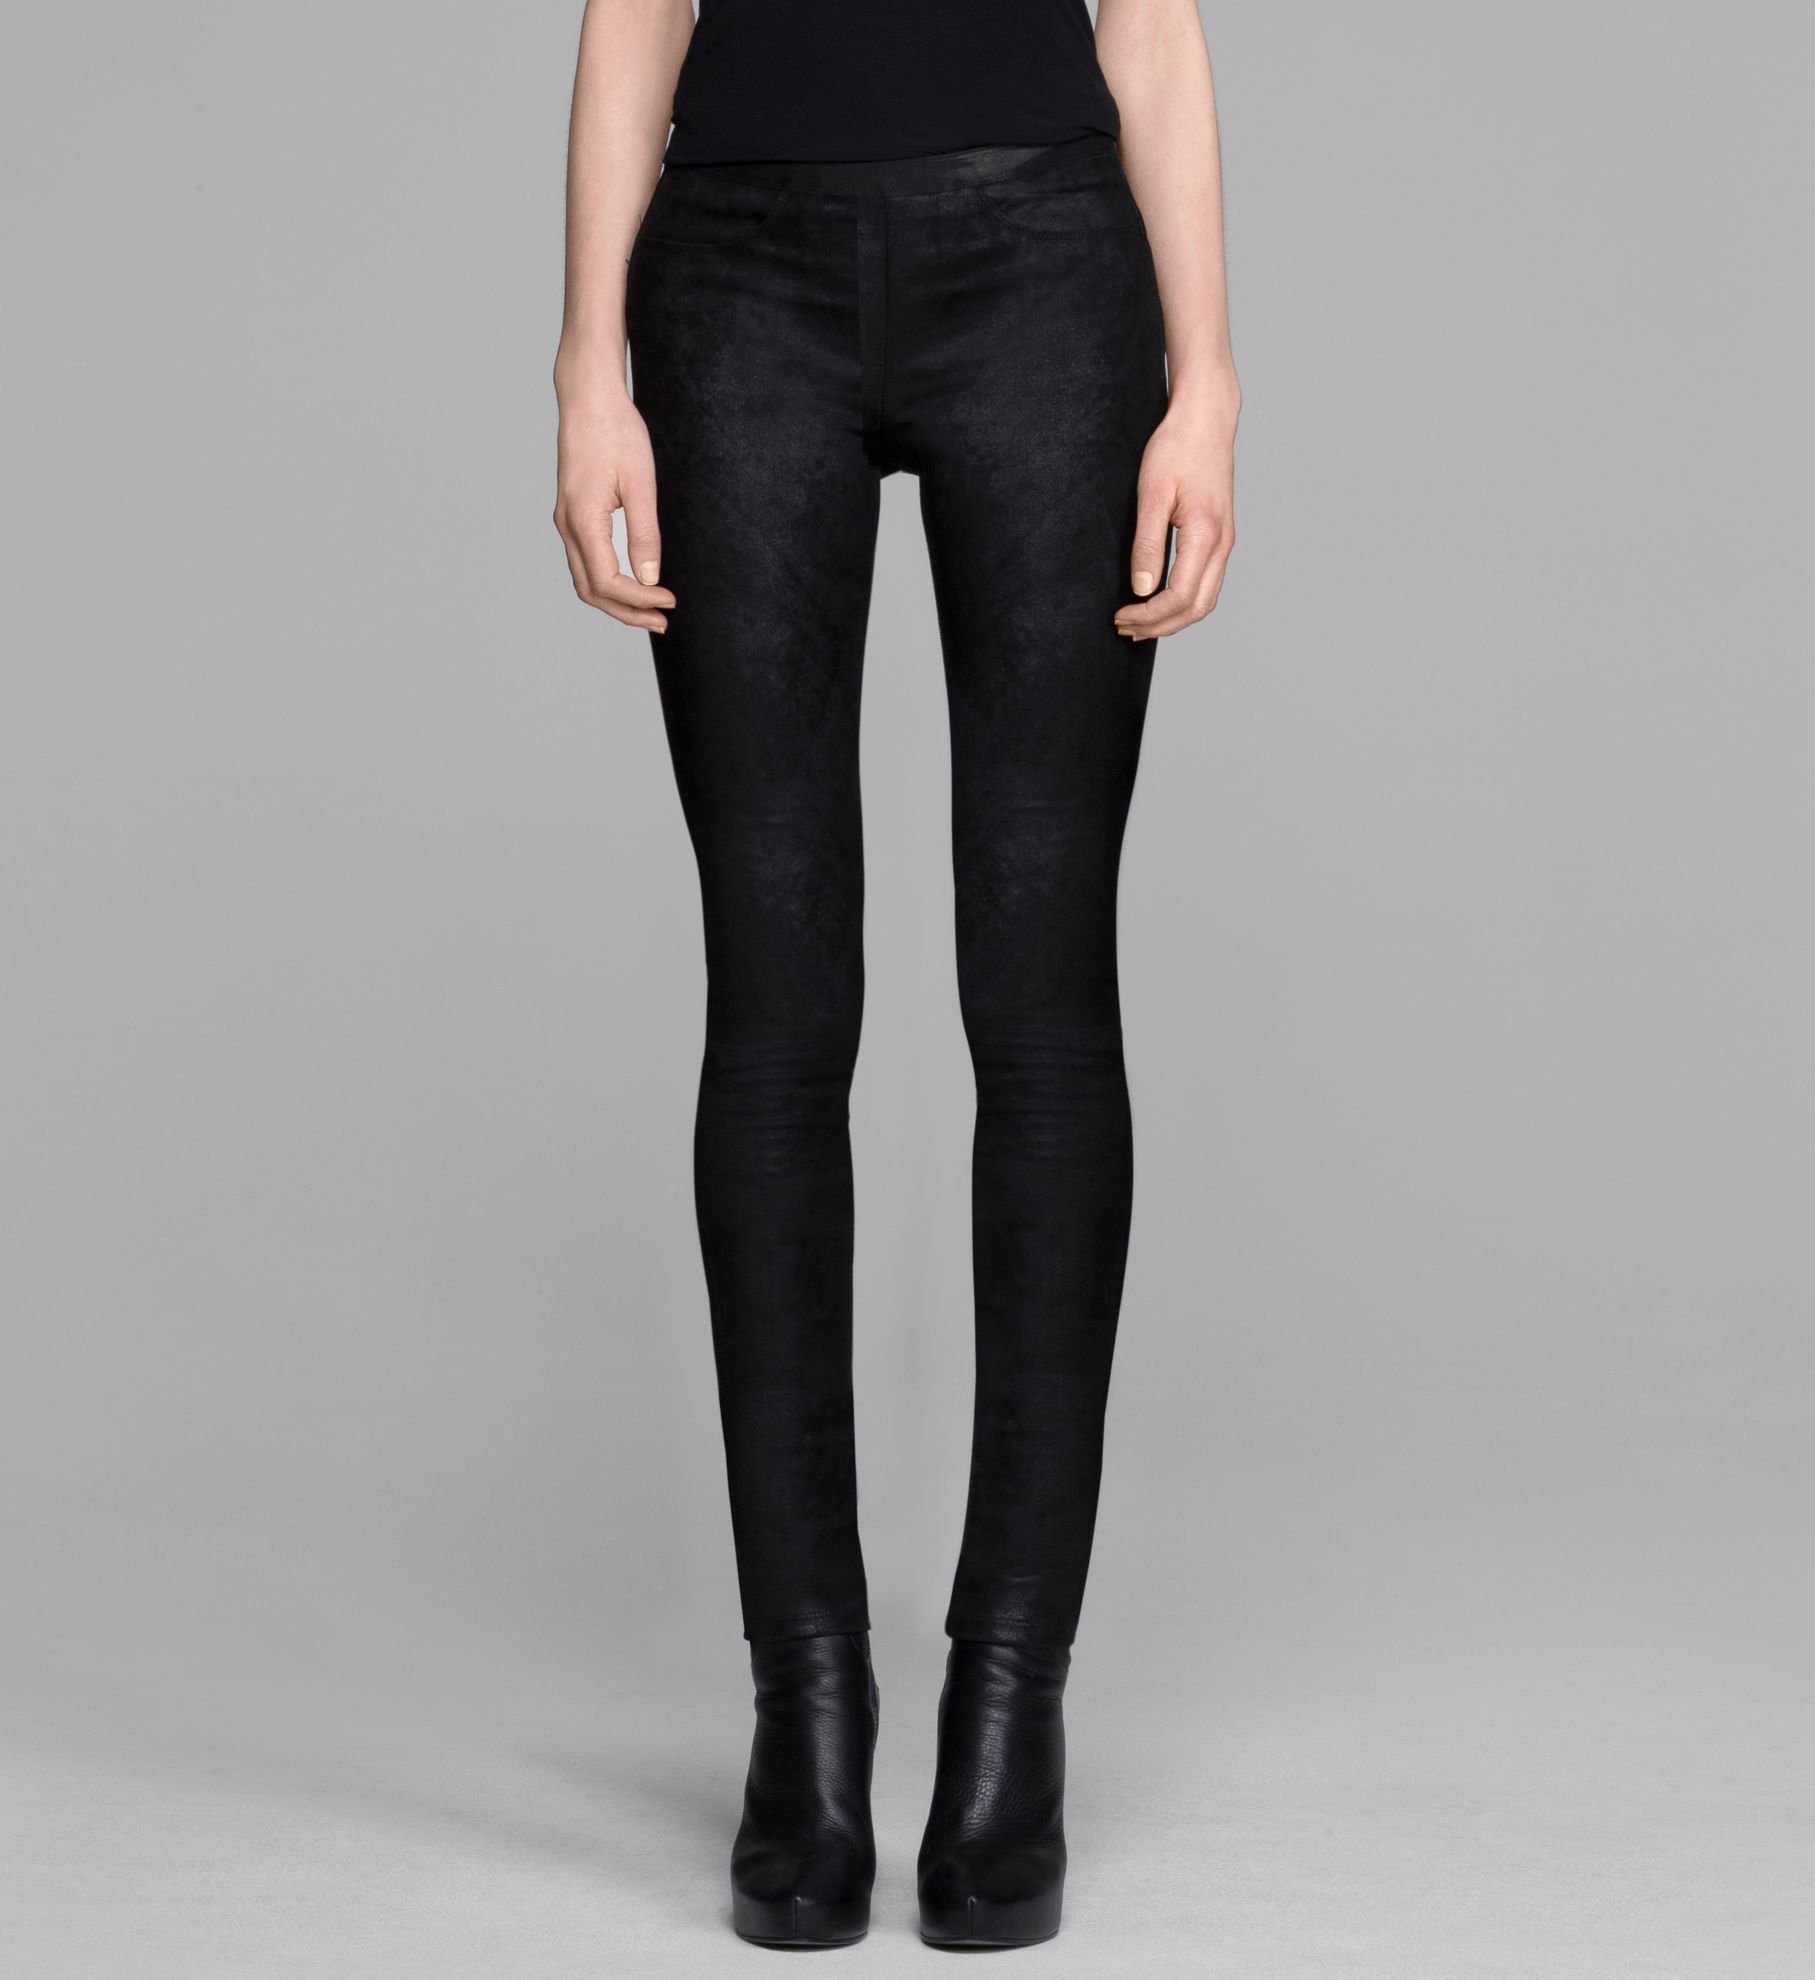 Helmut Lang Patina Stretch Leather Leggings in Black | Lyst